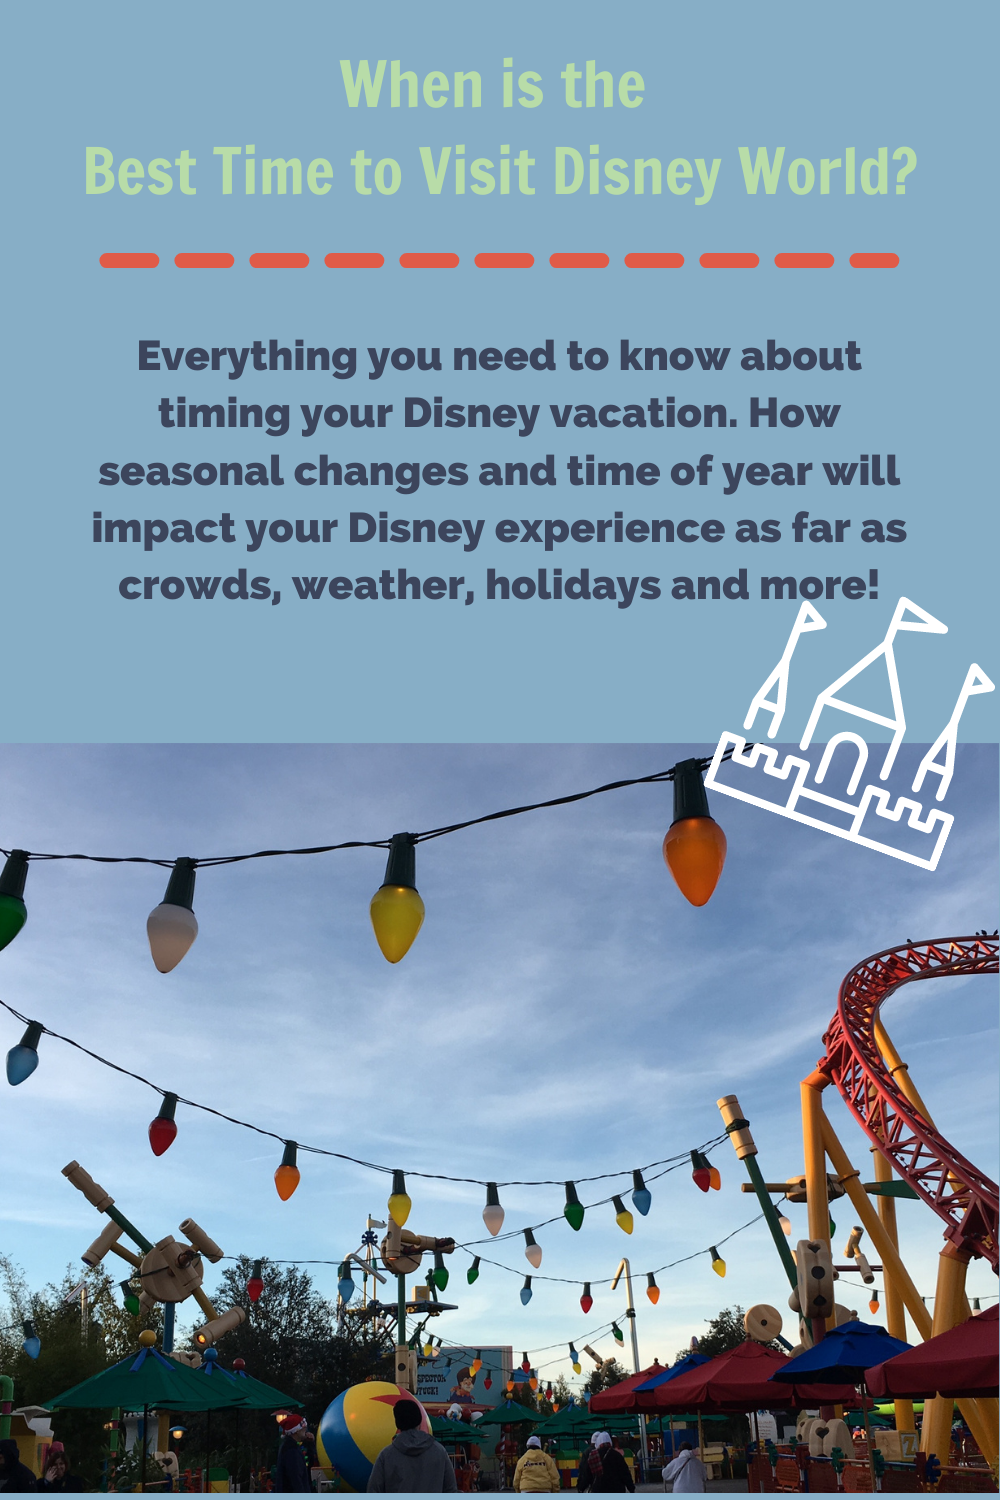 When is the Best Time to Visit Disney World